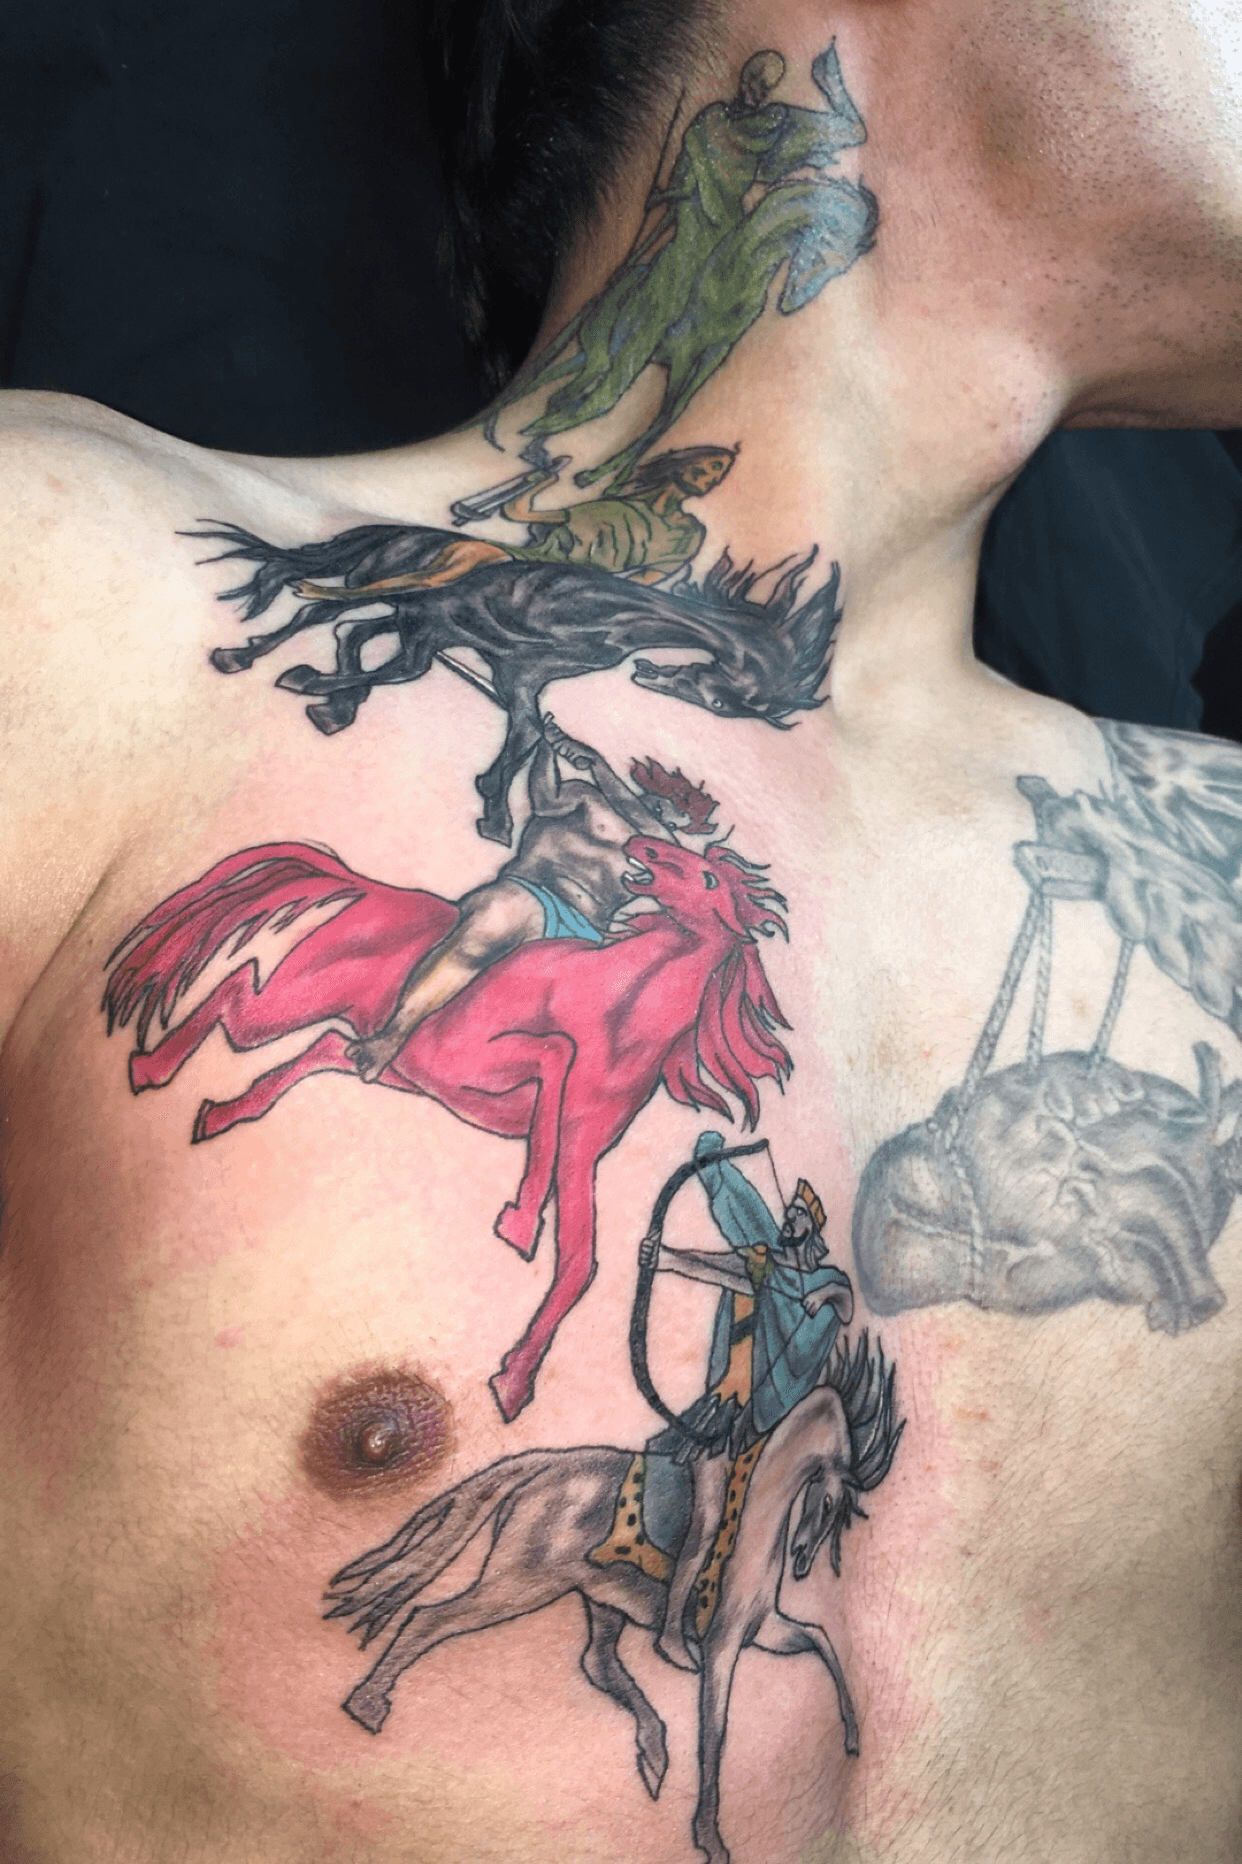 Carl Grace Tattoos  My rendition of the 4 horsemen of the apocalypse 3  days straight Thanks for sitting like a boss Shawn Eternal Ink Cheyenne  Professional Tattoo Equipment done at Aged